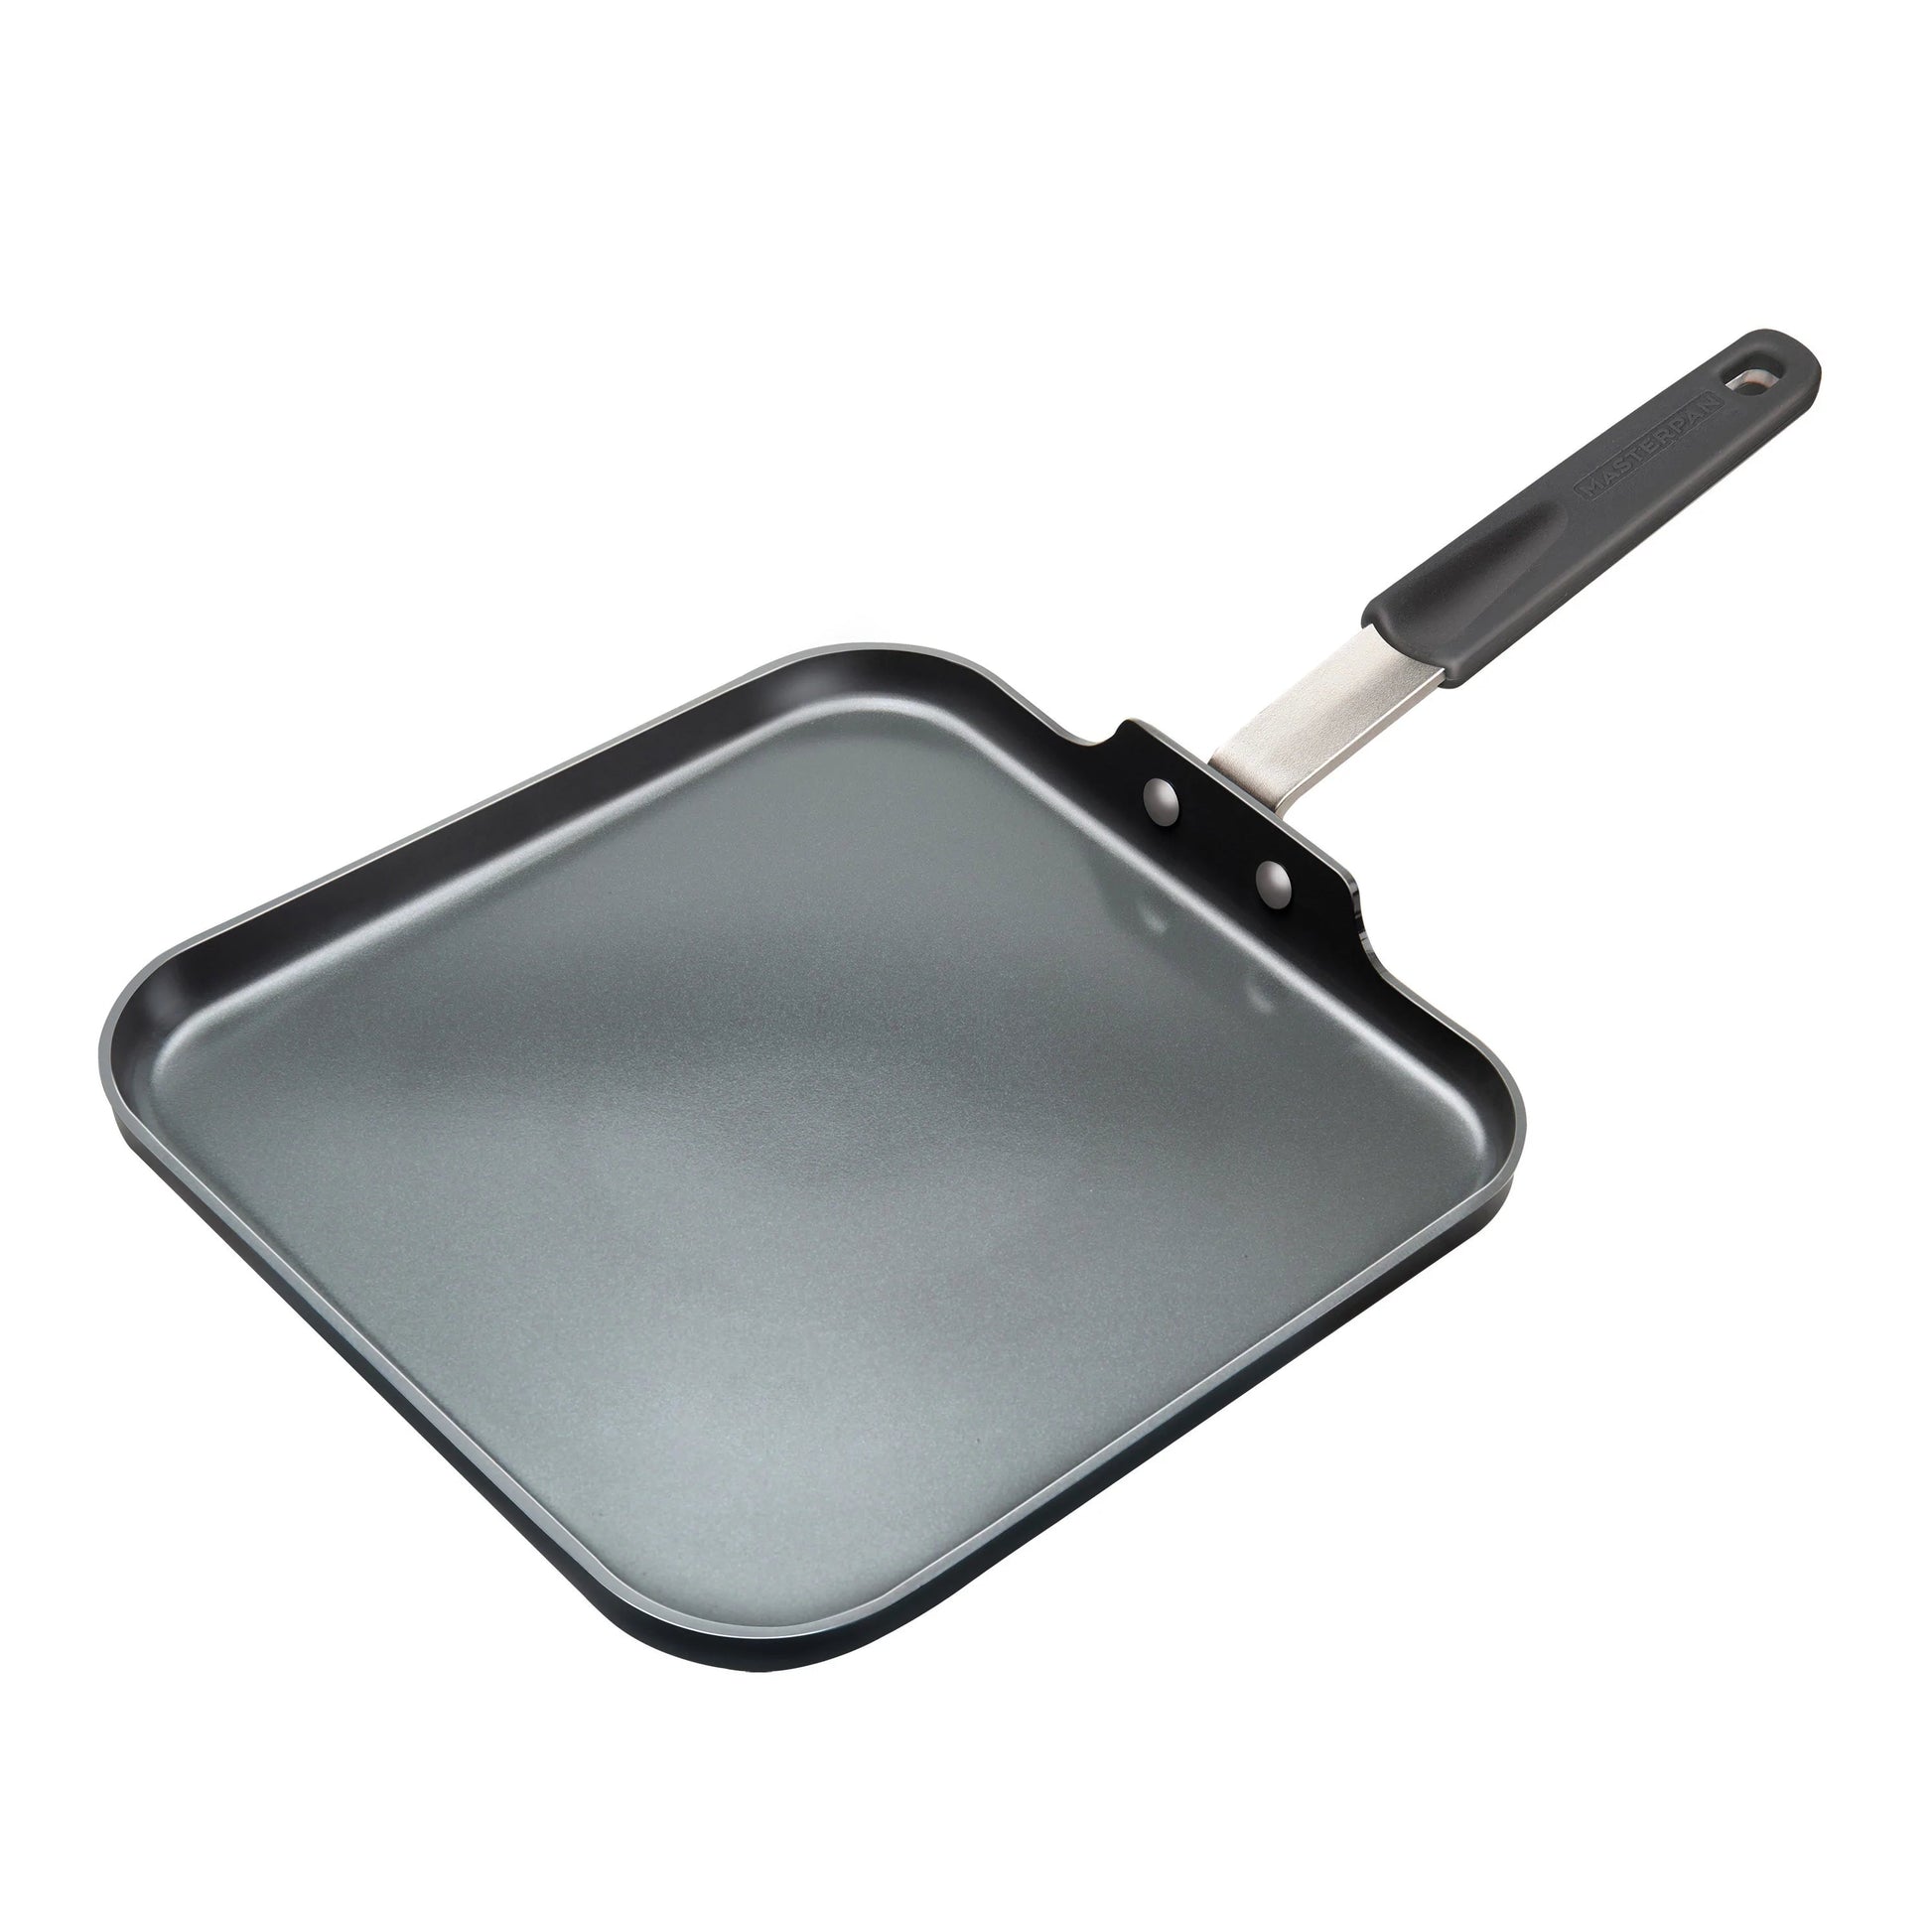 https://kitchenoasis.com/cdn/shop/files/MASTERPAN-Chefs-Series-11-Griddle-Pan-Pancake-Pan-Healthy-Ceramic-Non-stick-Aluminum-Cookware-With-Stainless-Steel-Chefs-Handle.webp?v=1685842105&width=1946